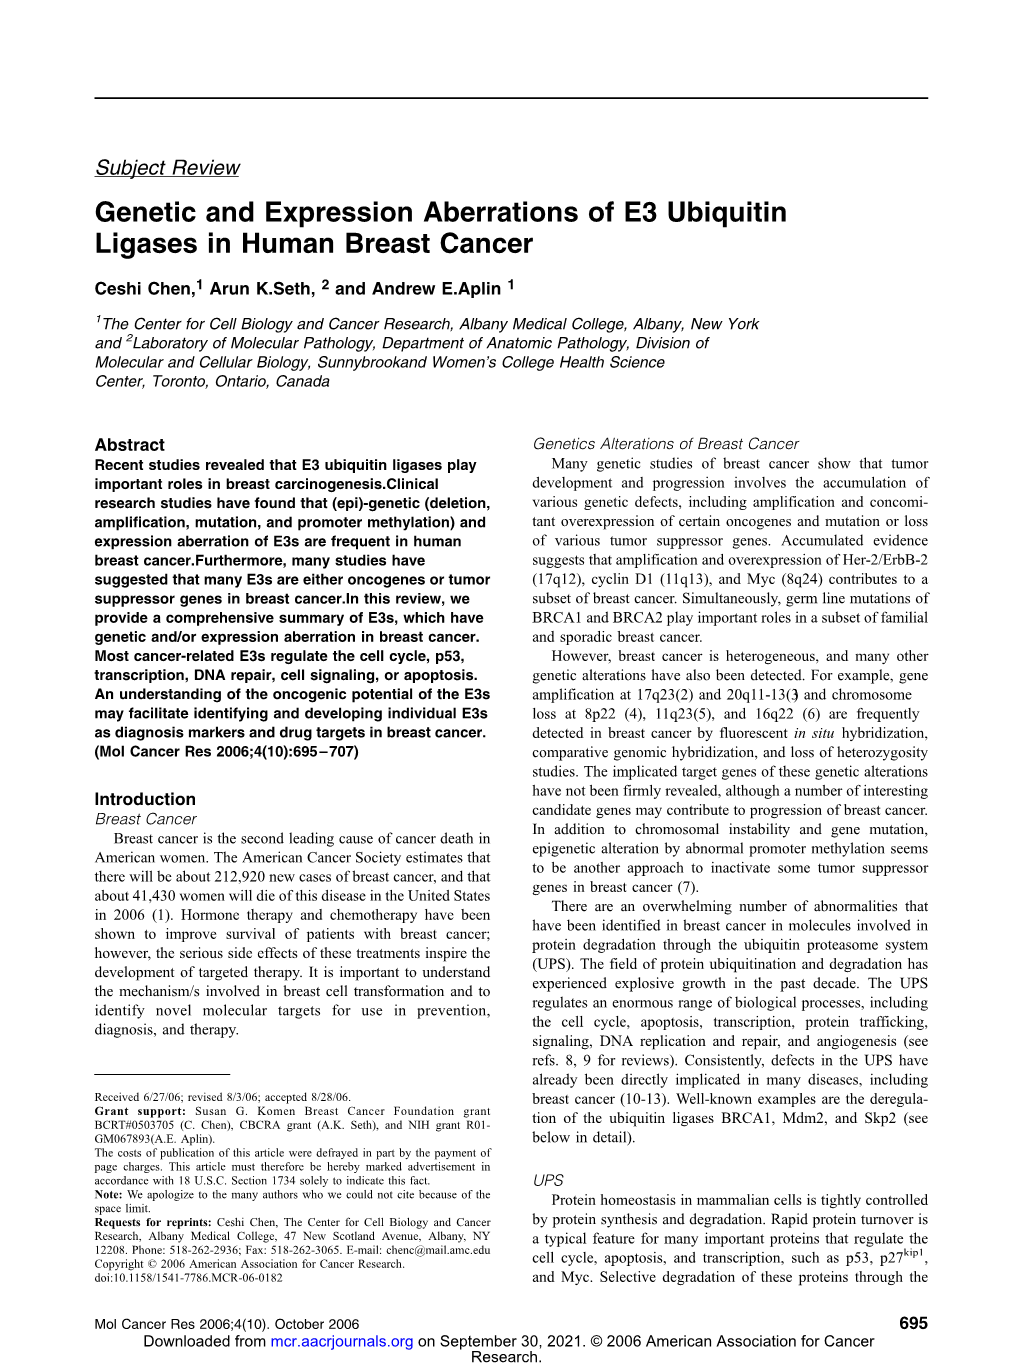 Genetic and Expression Aberrations of E3 Ubiquitin Ligases in Human Breast Cancer